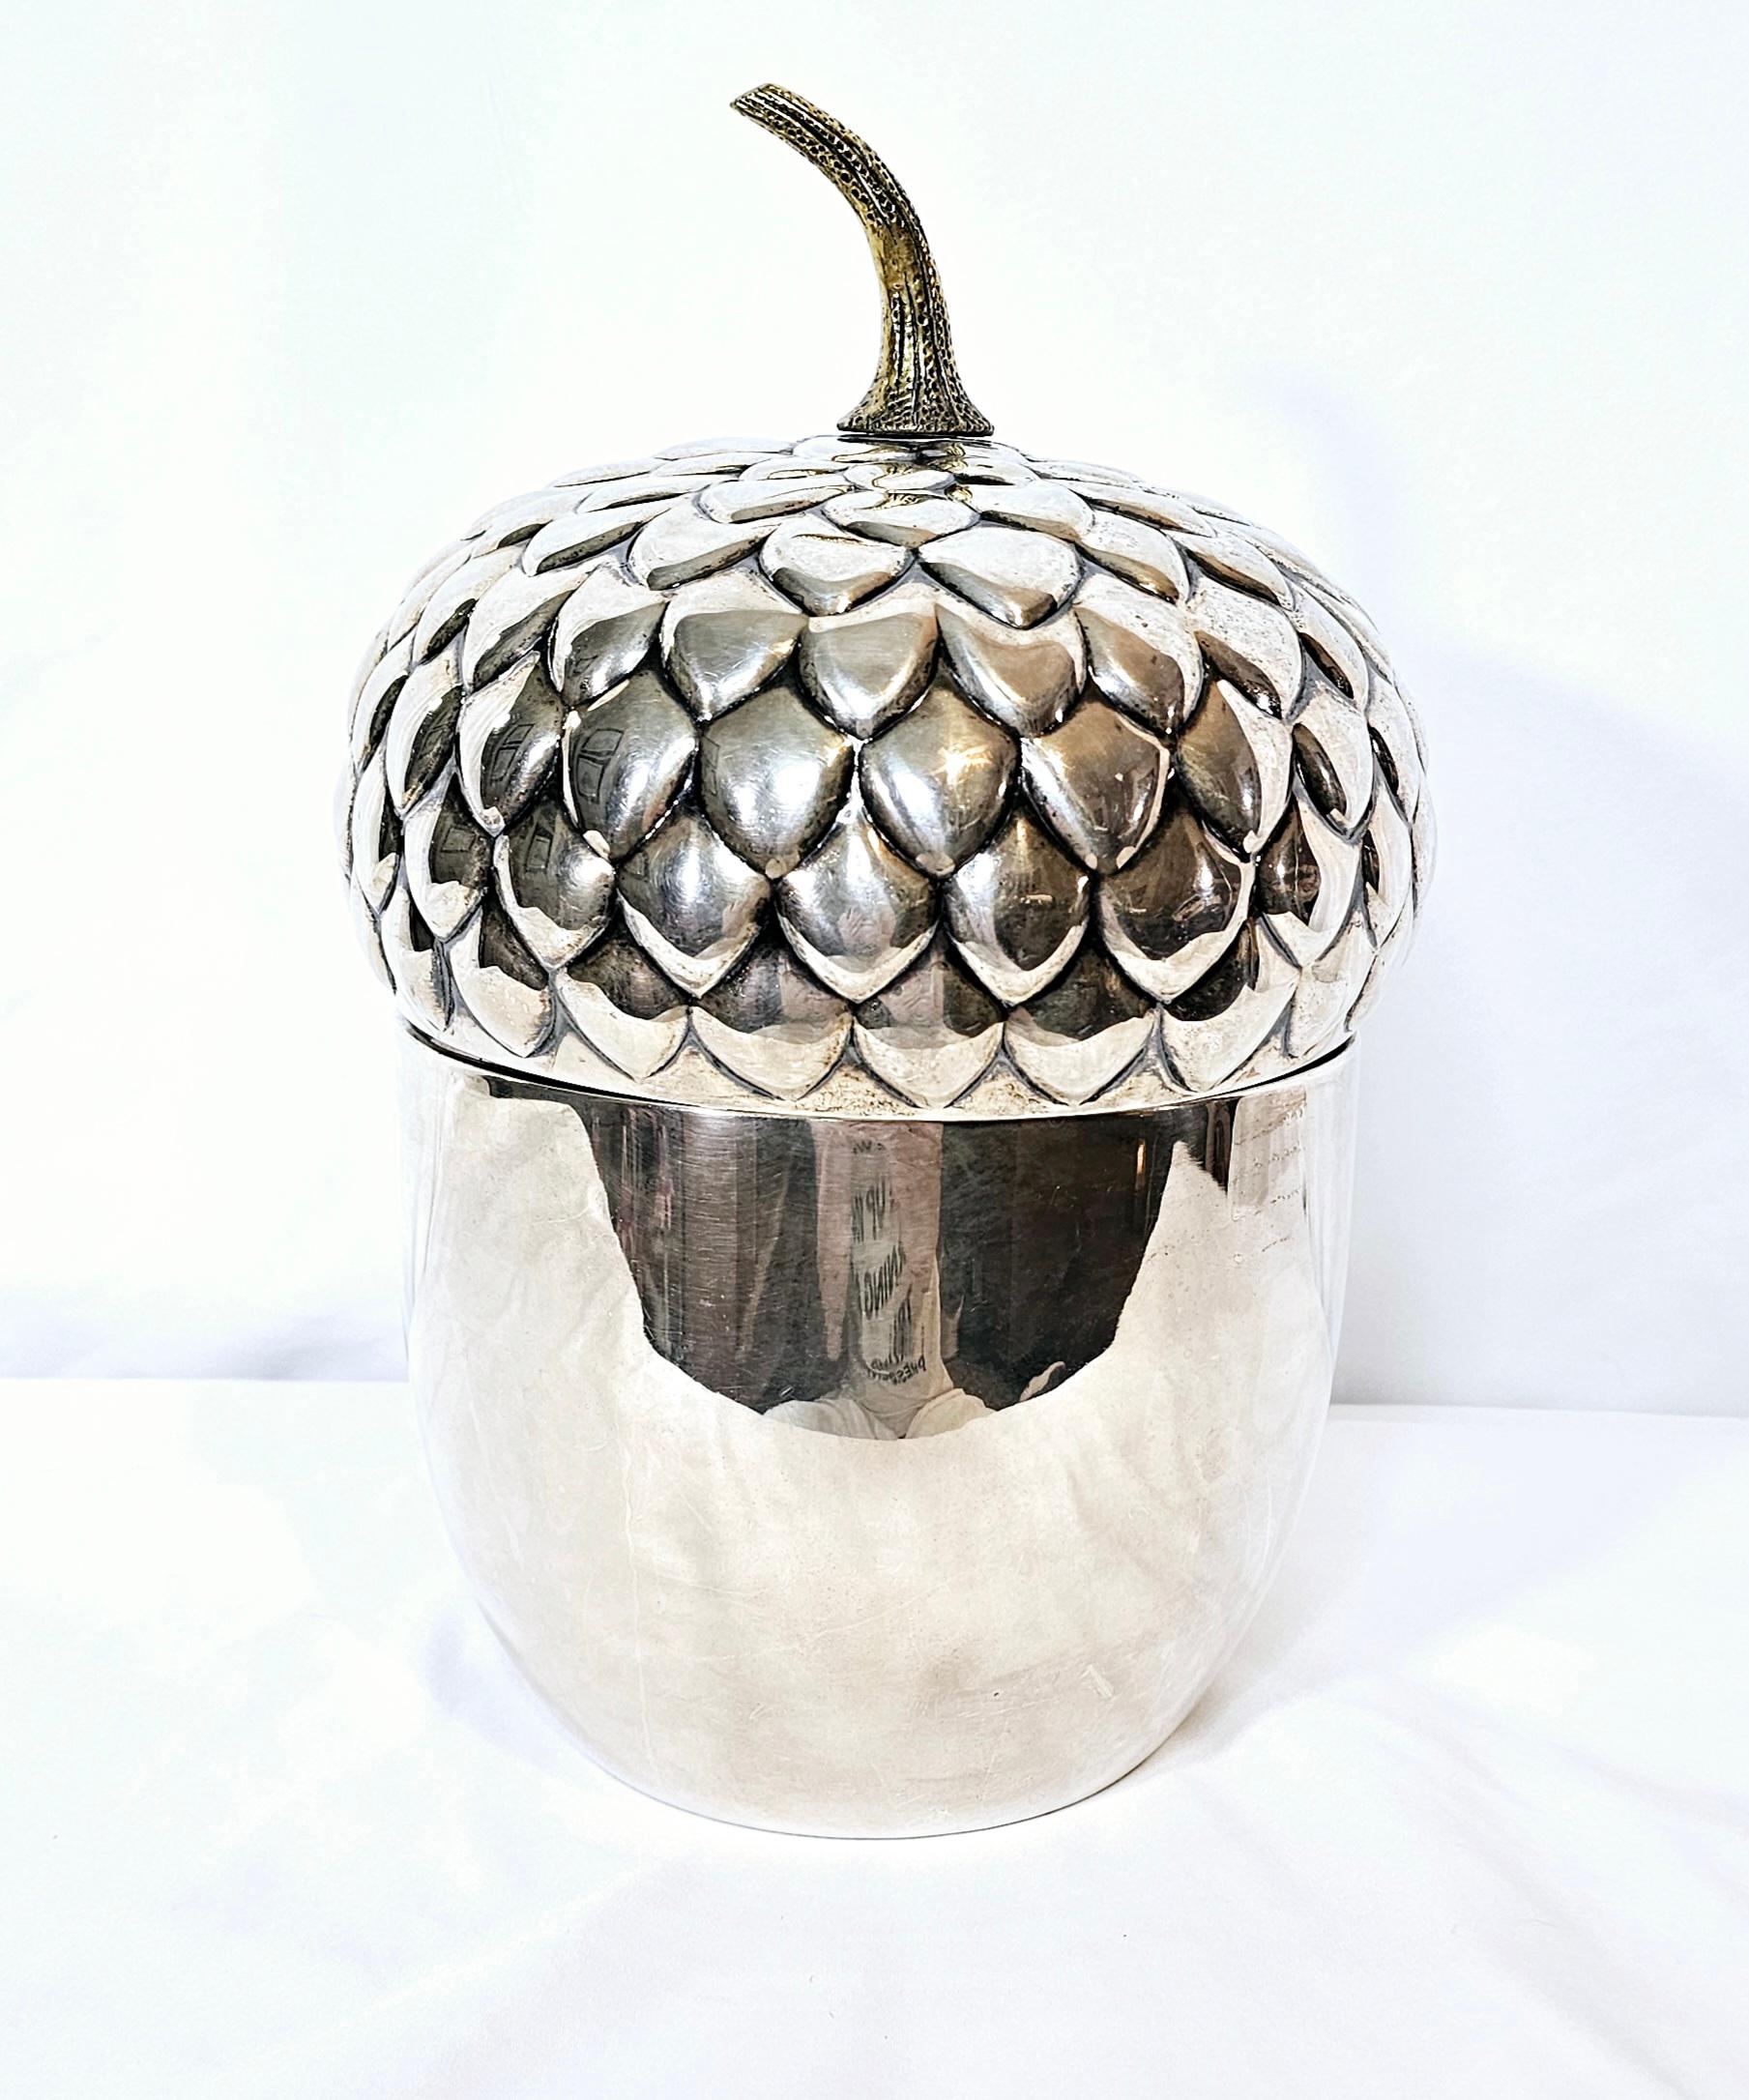 Acorn Shaped Ice Bucket by Teghini Firenze 1960s For Sale 6